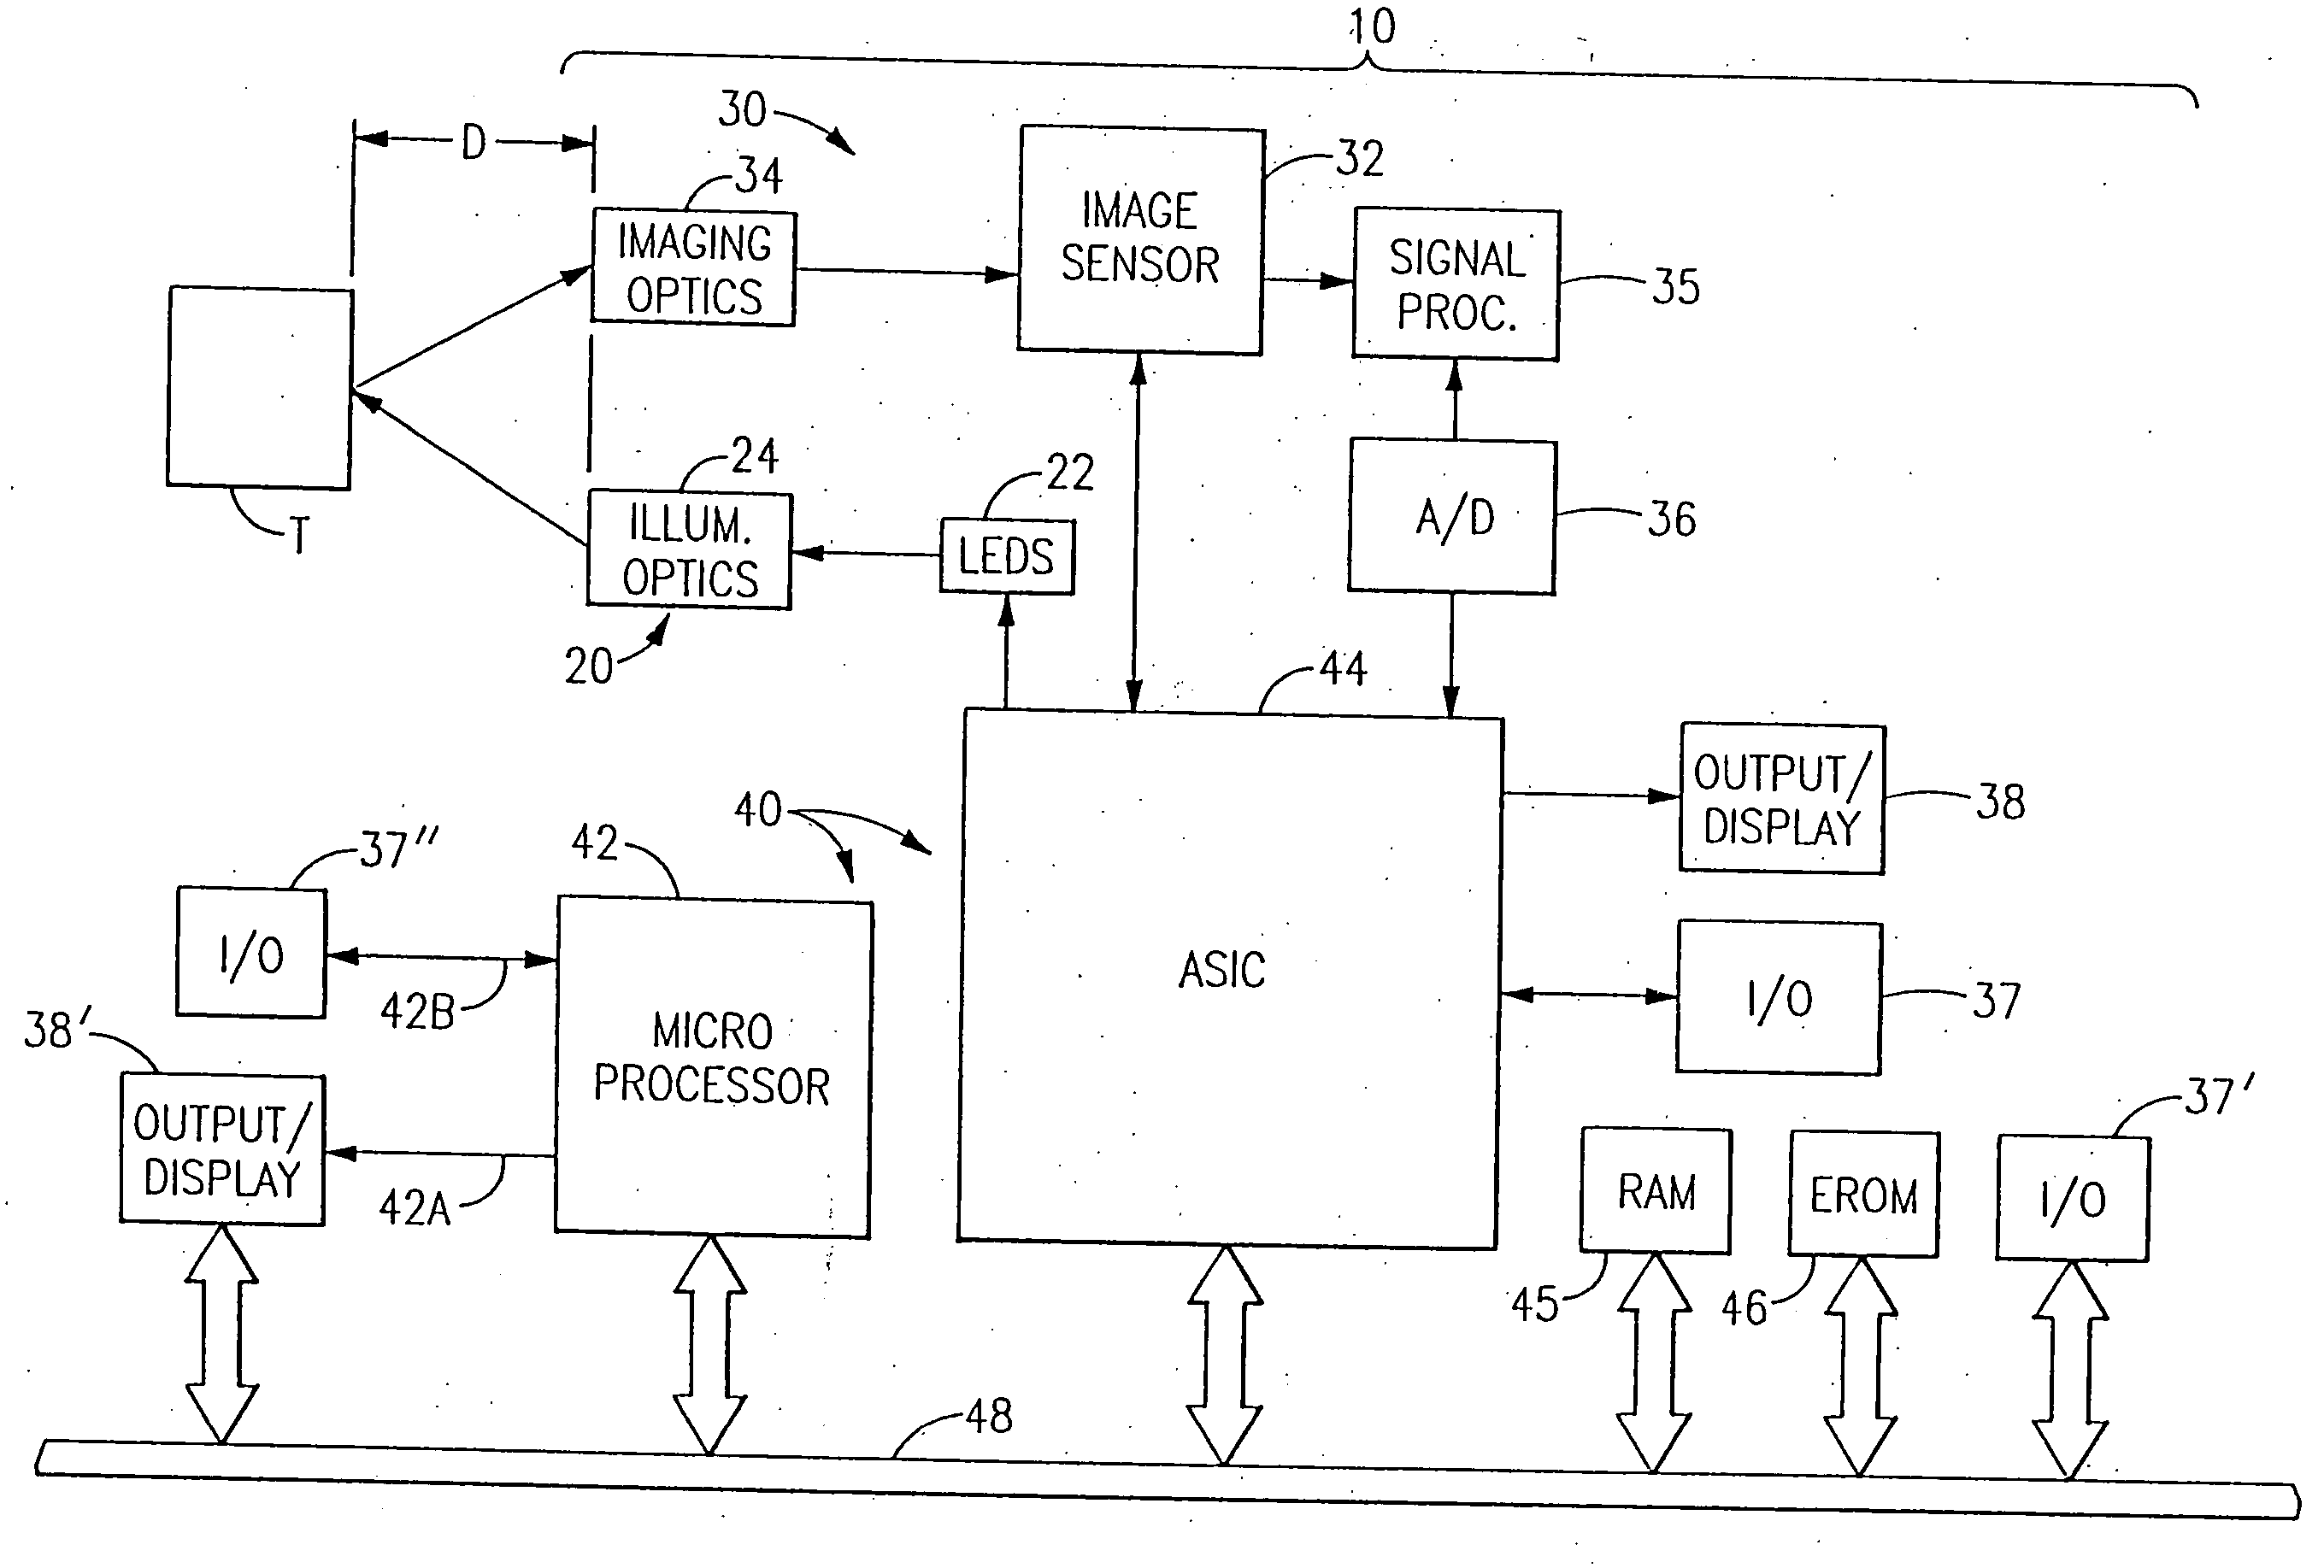 Optical reader having two-dimensional solid state image sensor and light generator